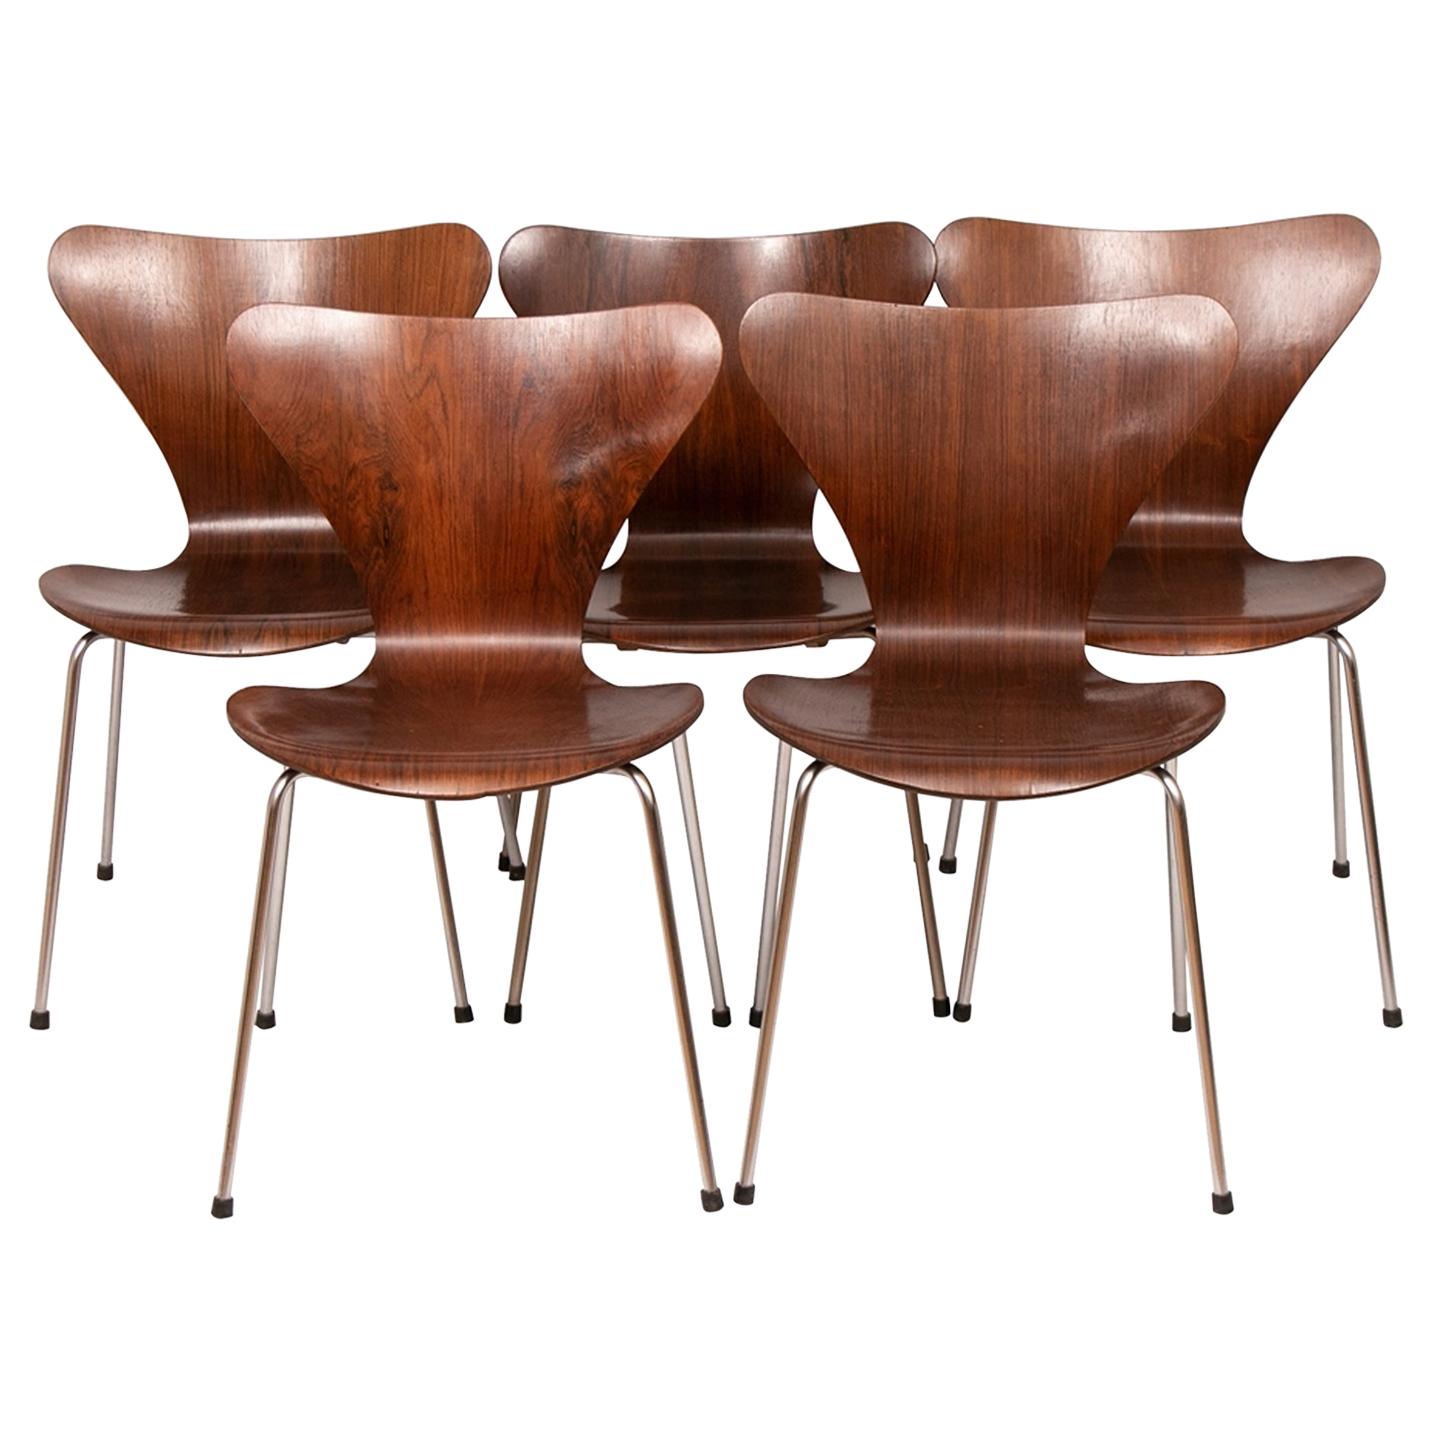 Set of 5 Series 7 Model 3107 Rosewood Chairs by Arne Jacobsen, circa 1960 For Sale